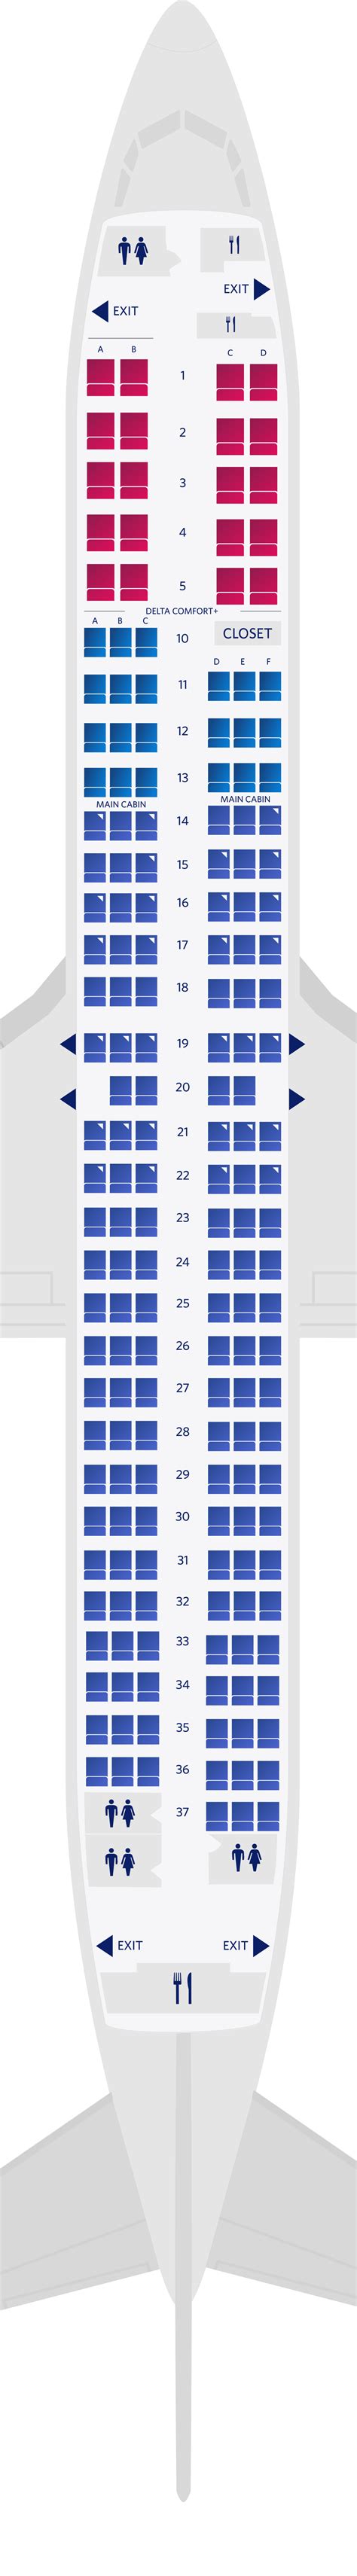 united airlines   seat map